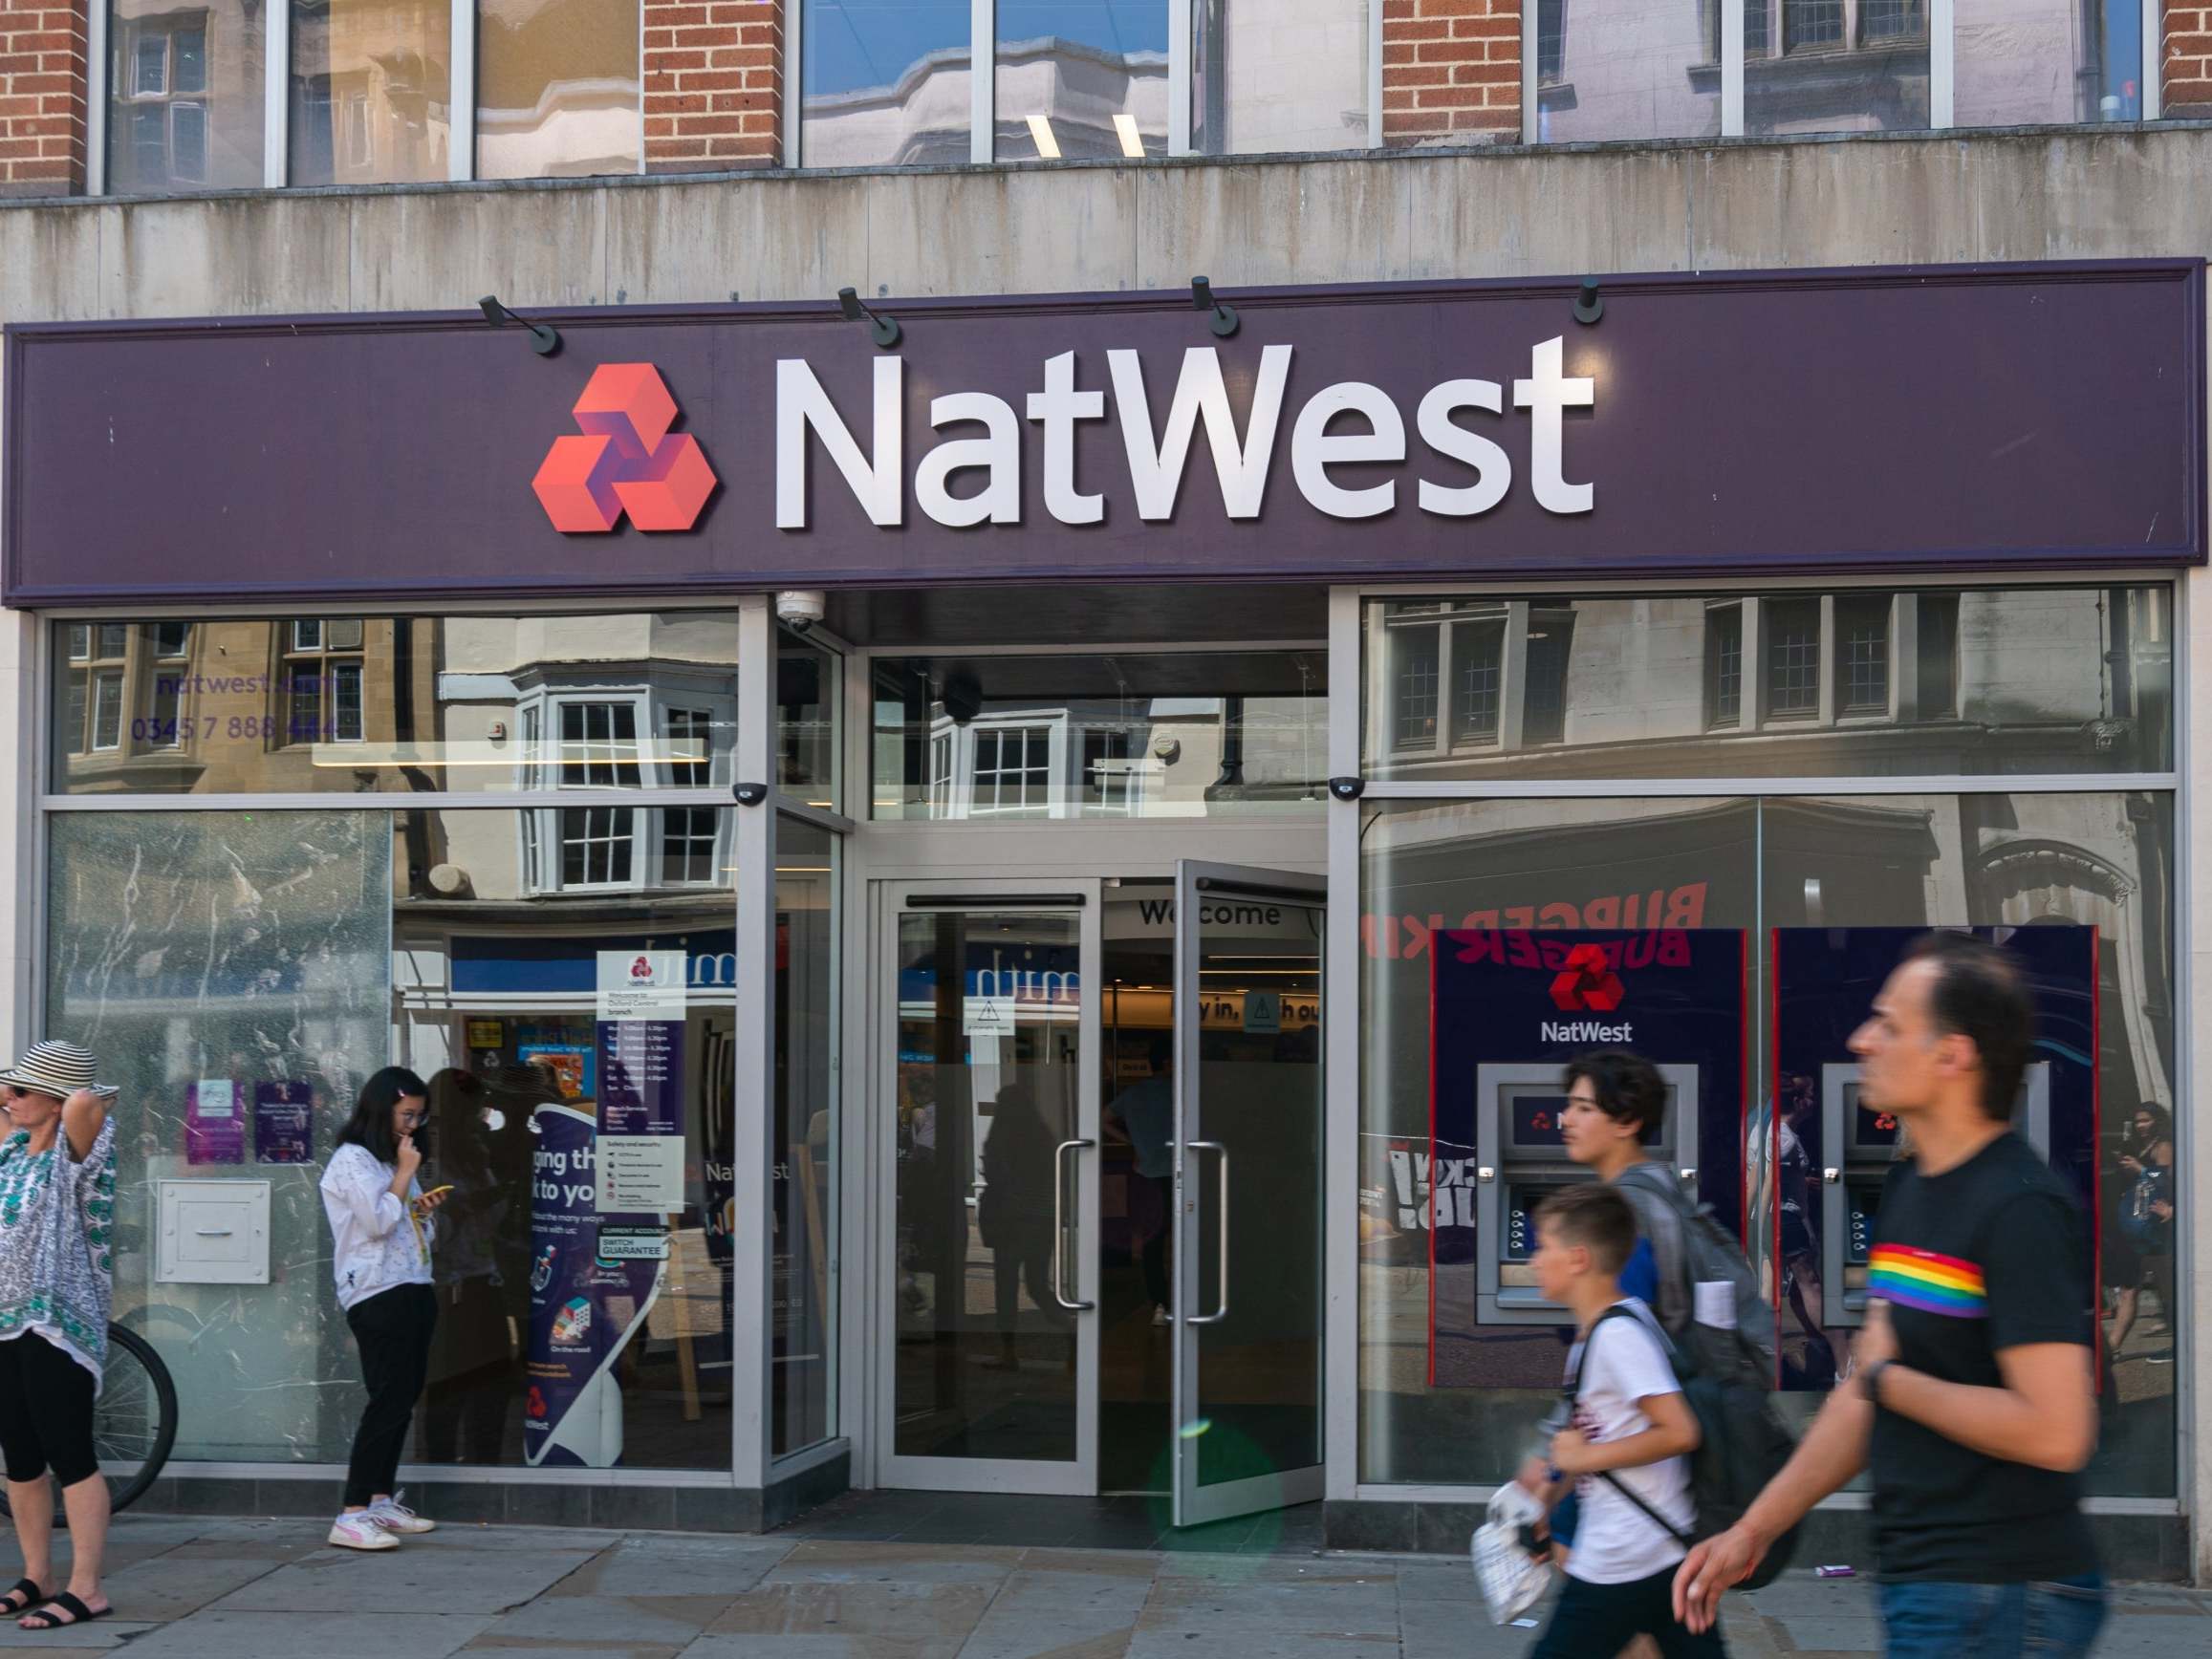 High street banks have been hit by regular outages in recent times